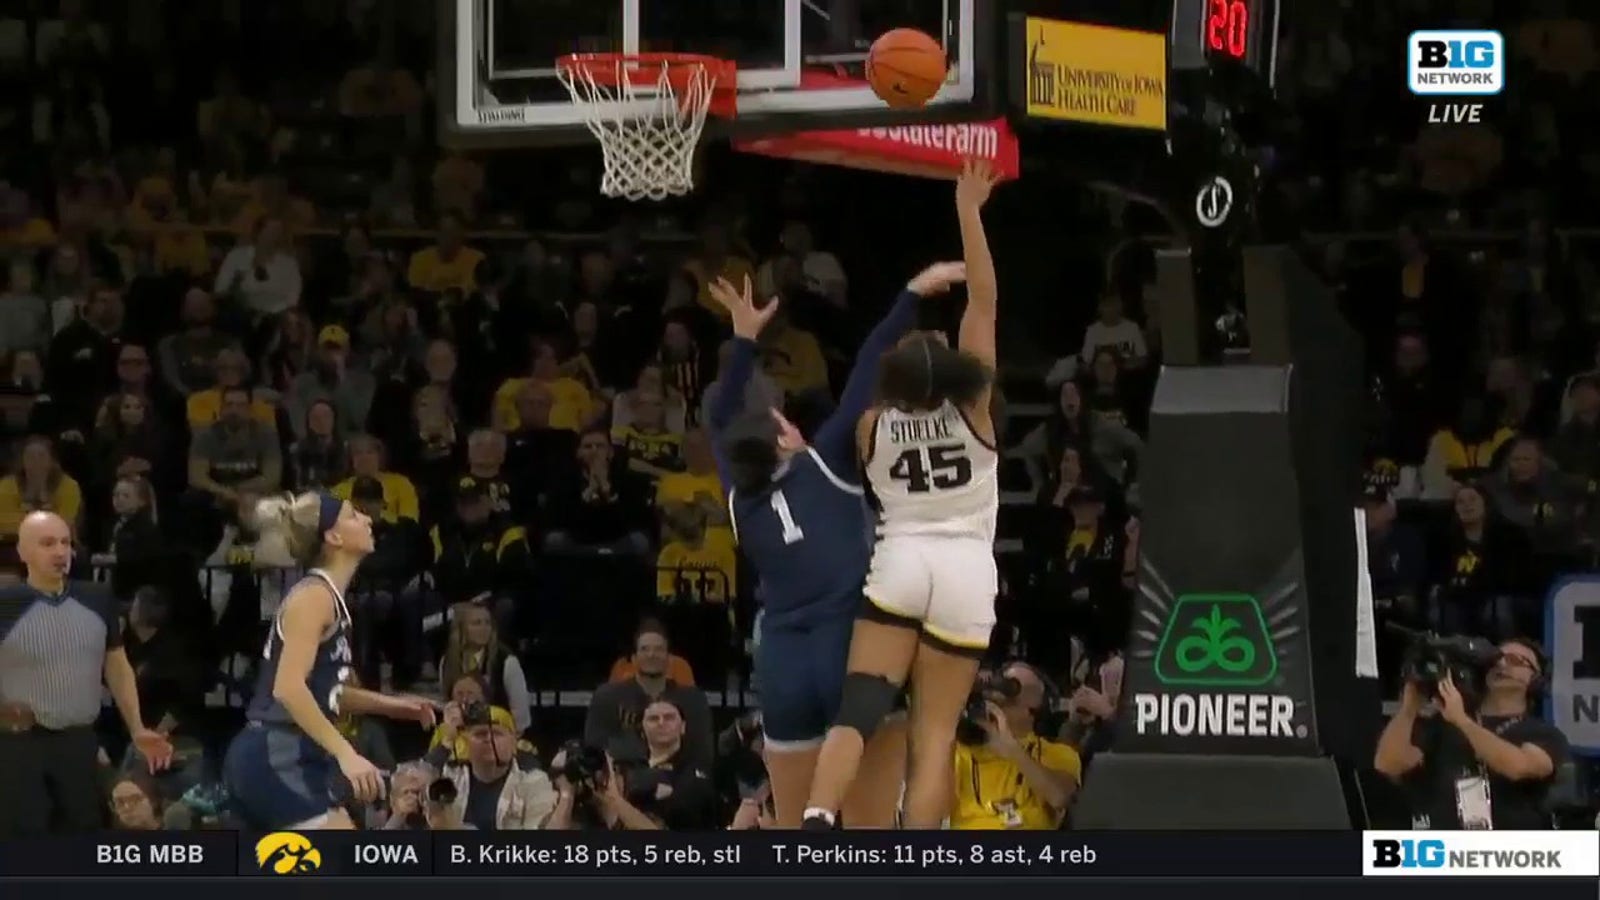 Iowa's Hannah Stuelke finishes a tough and-1 to finish with 47 points, second most in Iowa history, against Penn State